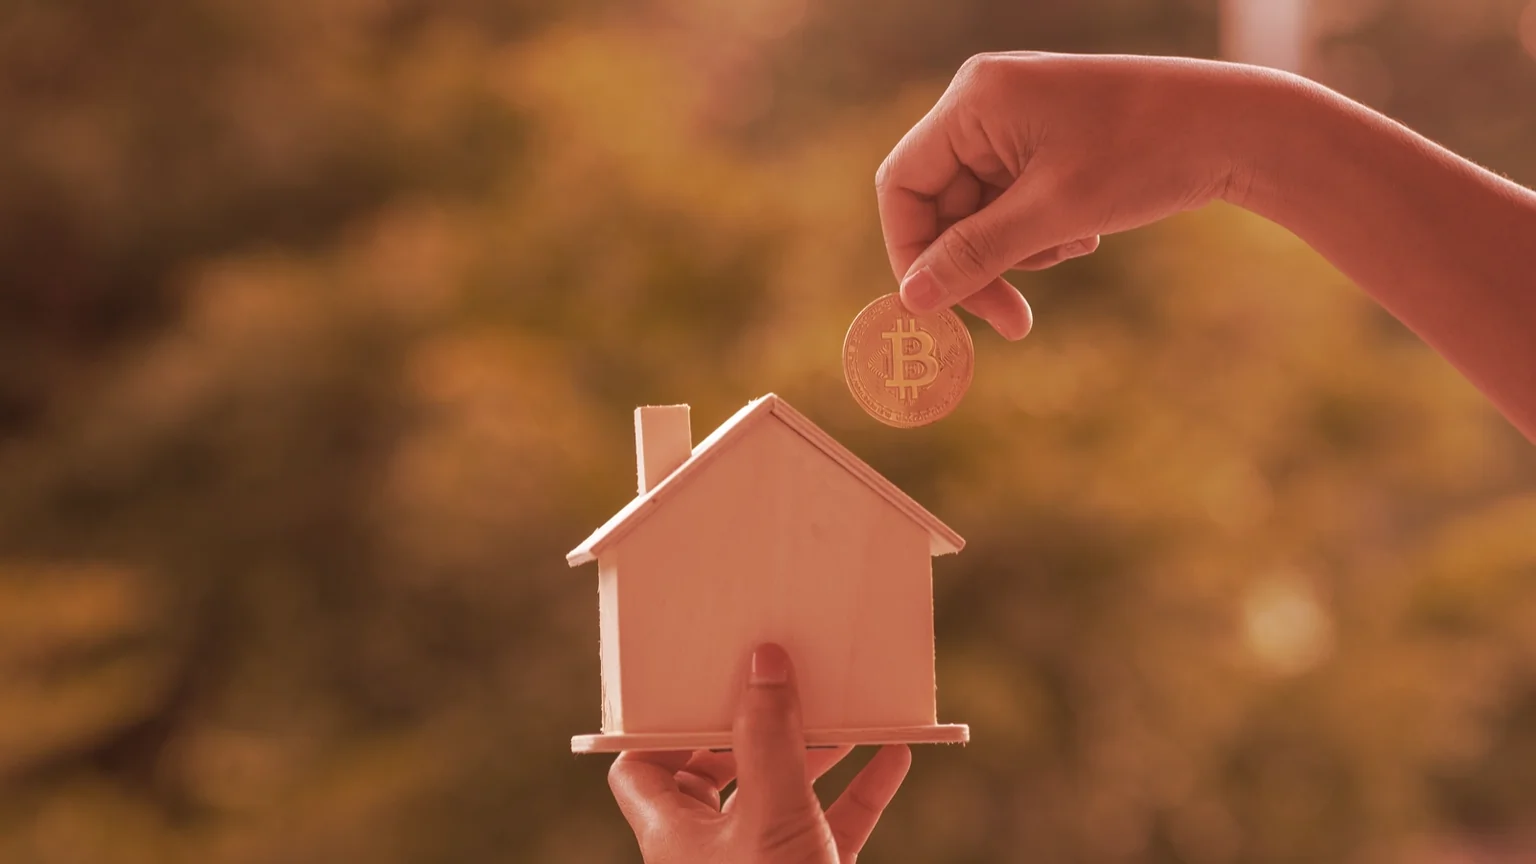 Bitcoin mortgages. Image: Shutterstock